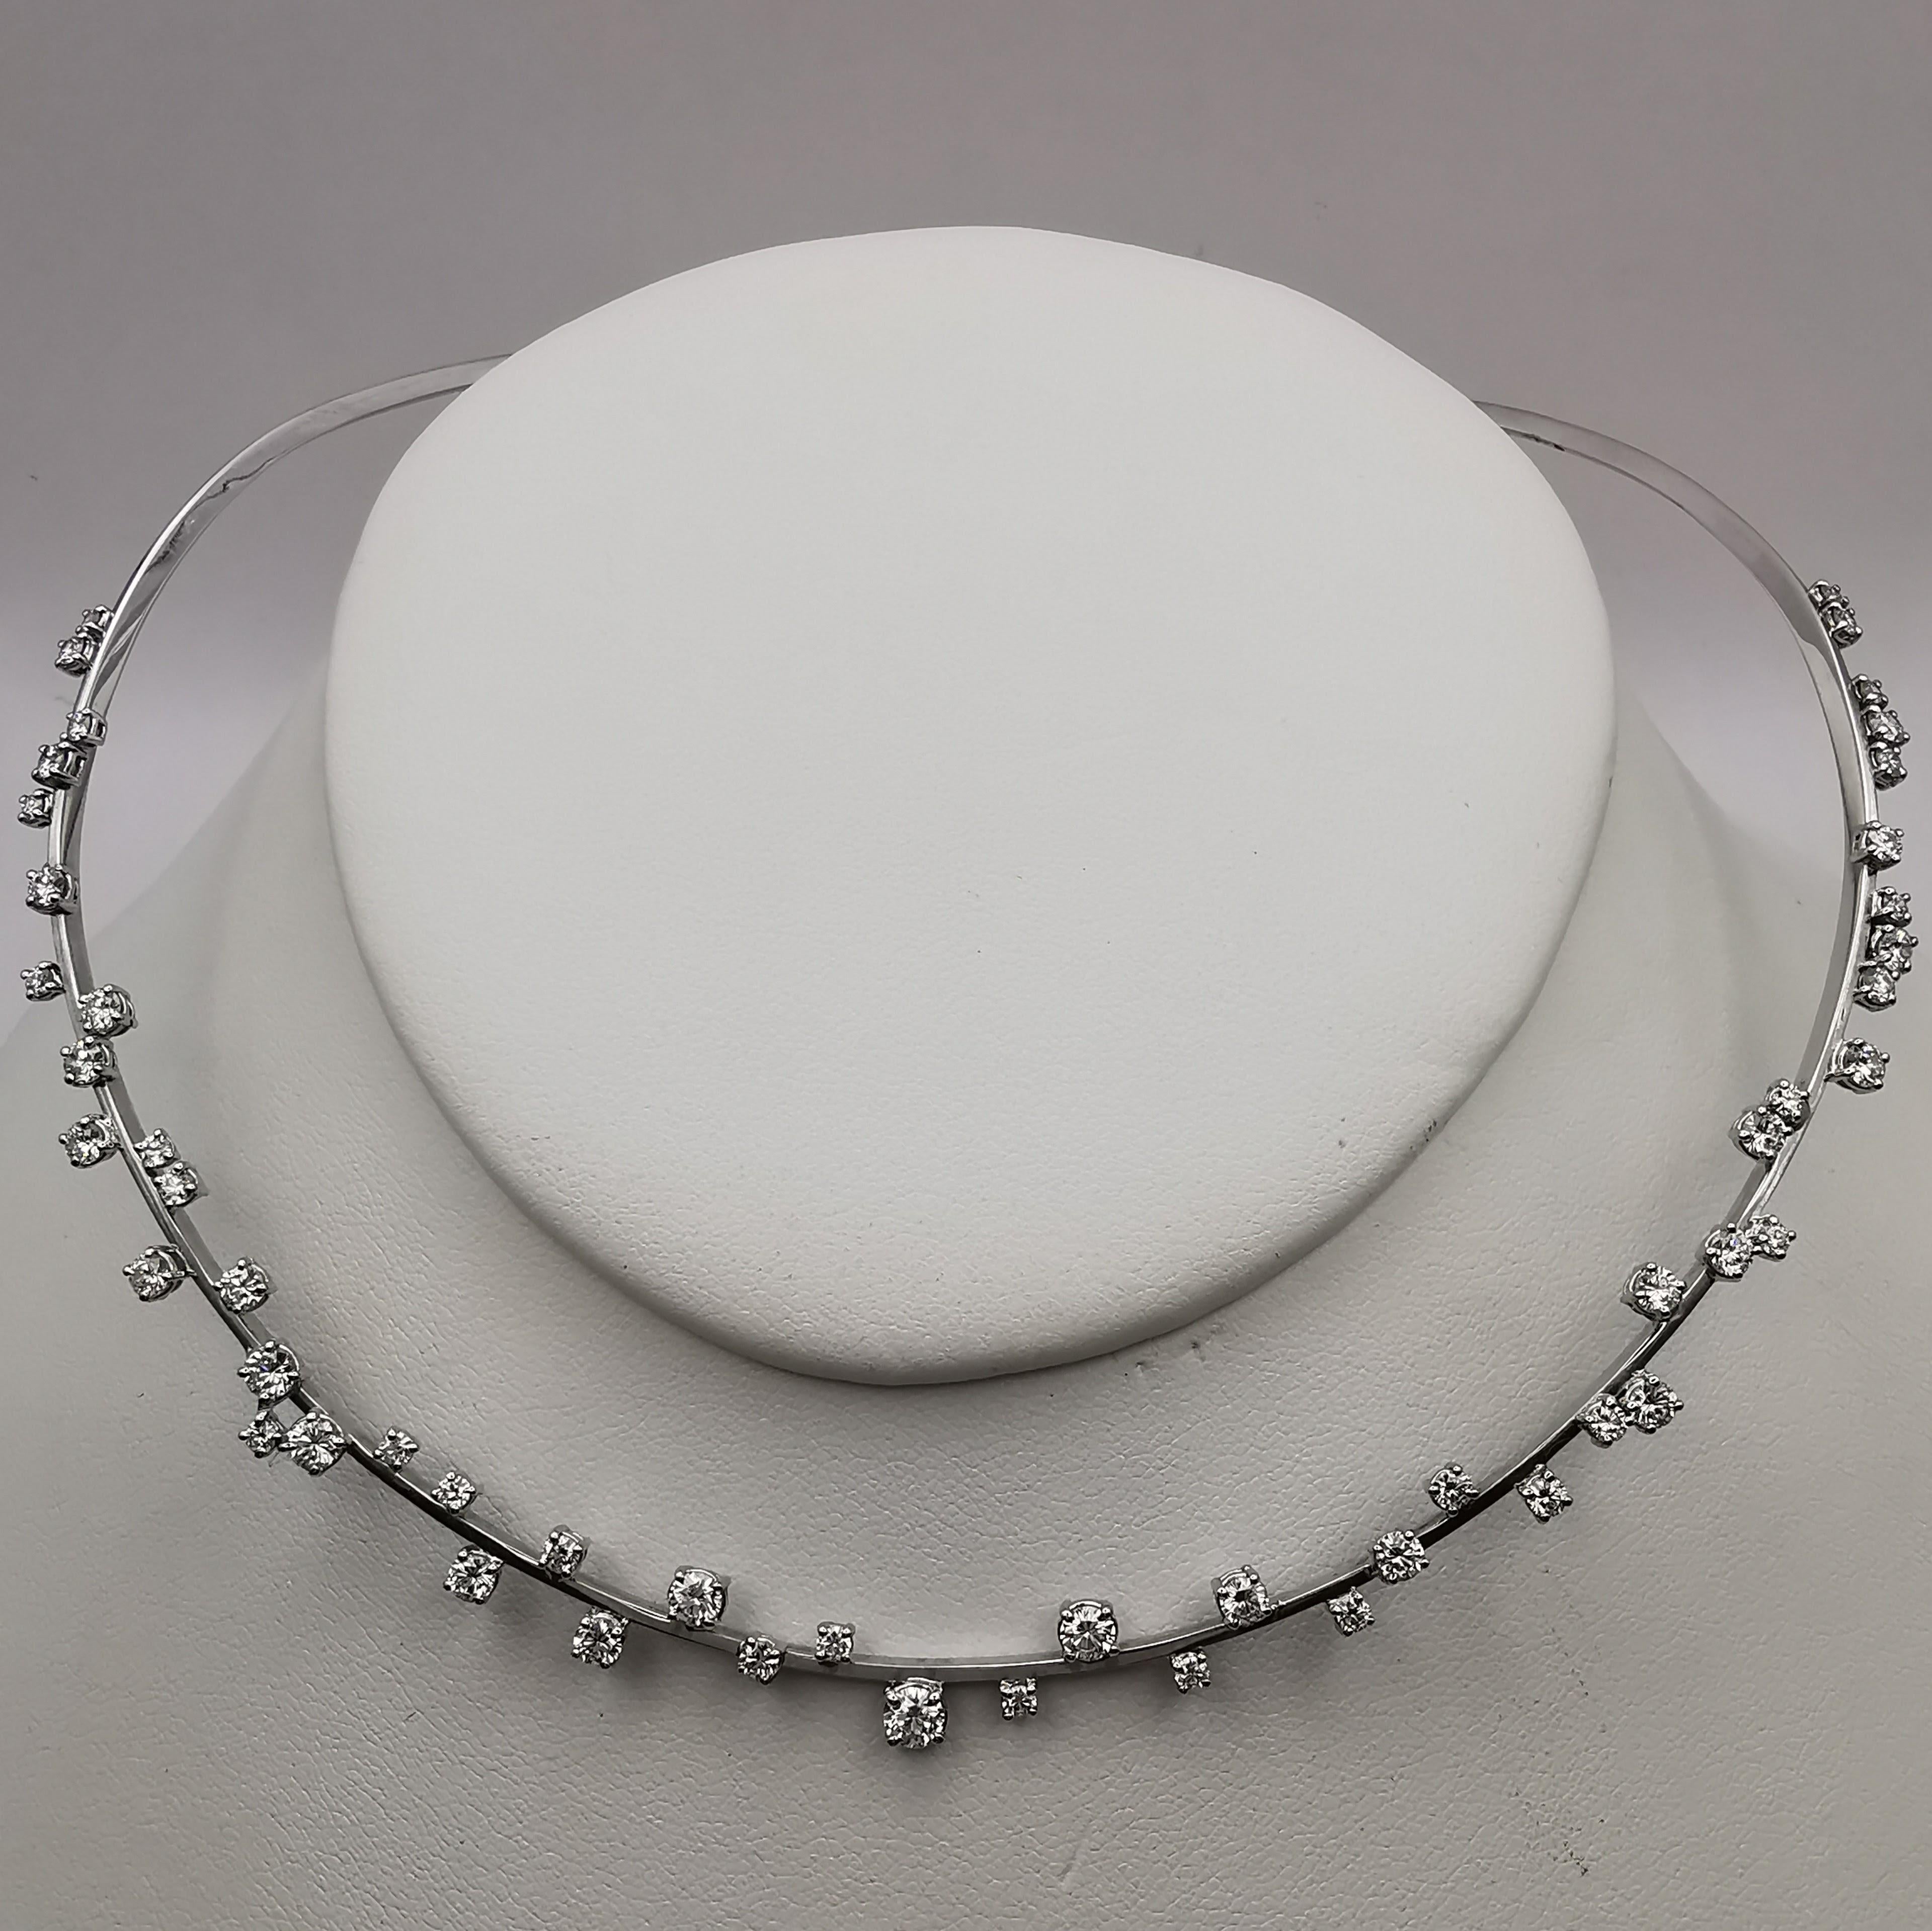 This stunning 21st century 3.33 carat diamond choker necklace is the perfect choice for anyone who loves diamonds and elegant jewelry. The necklace is made of high quality 18k white gold and features a beautiful and intricate design that is sure to